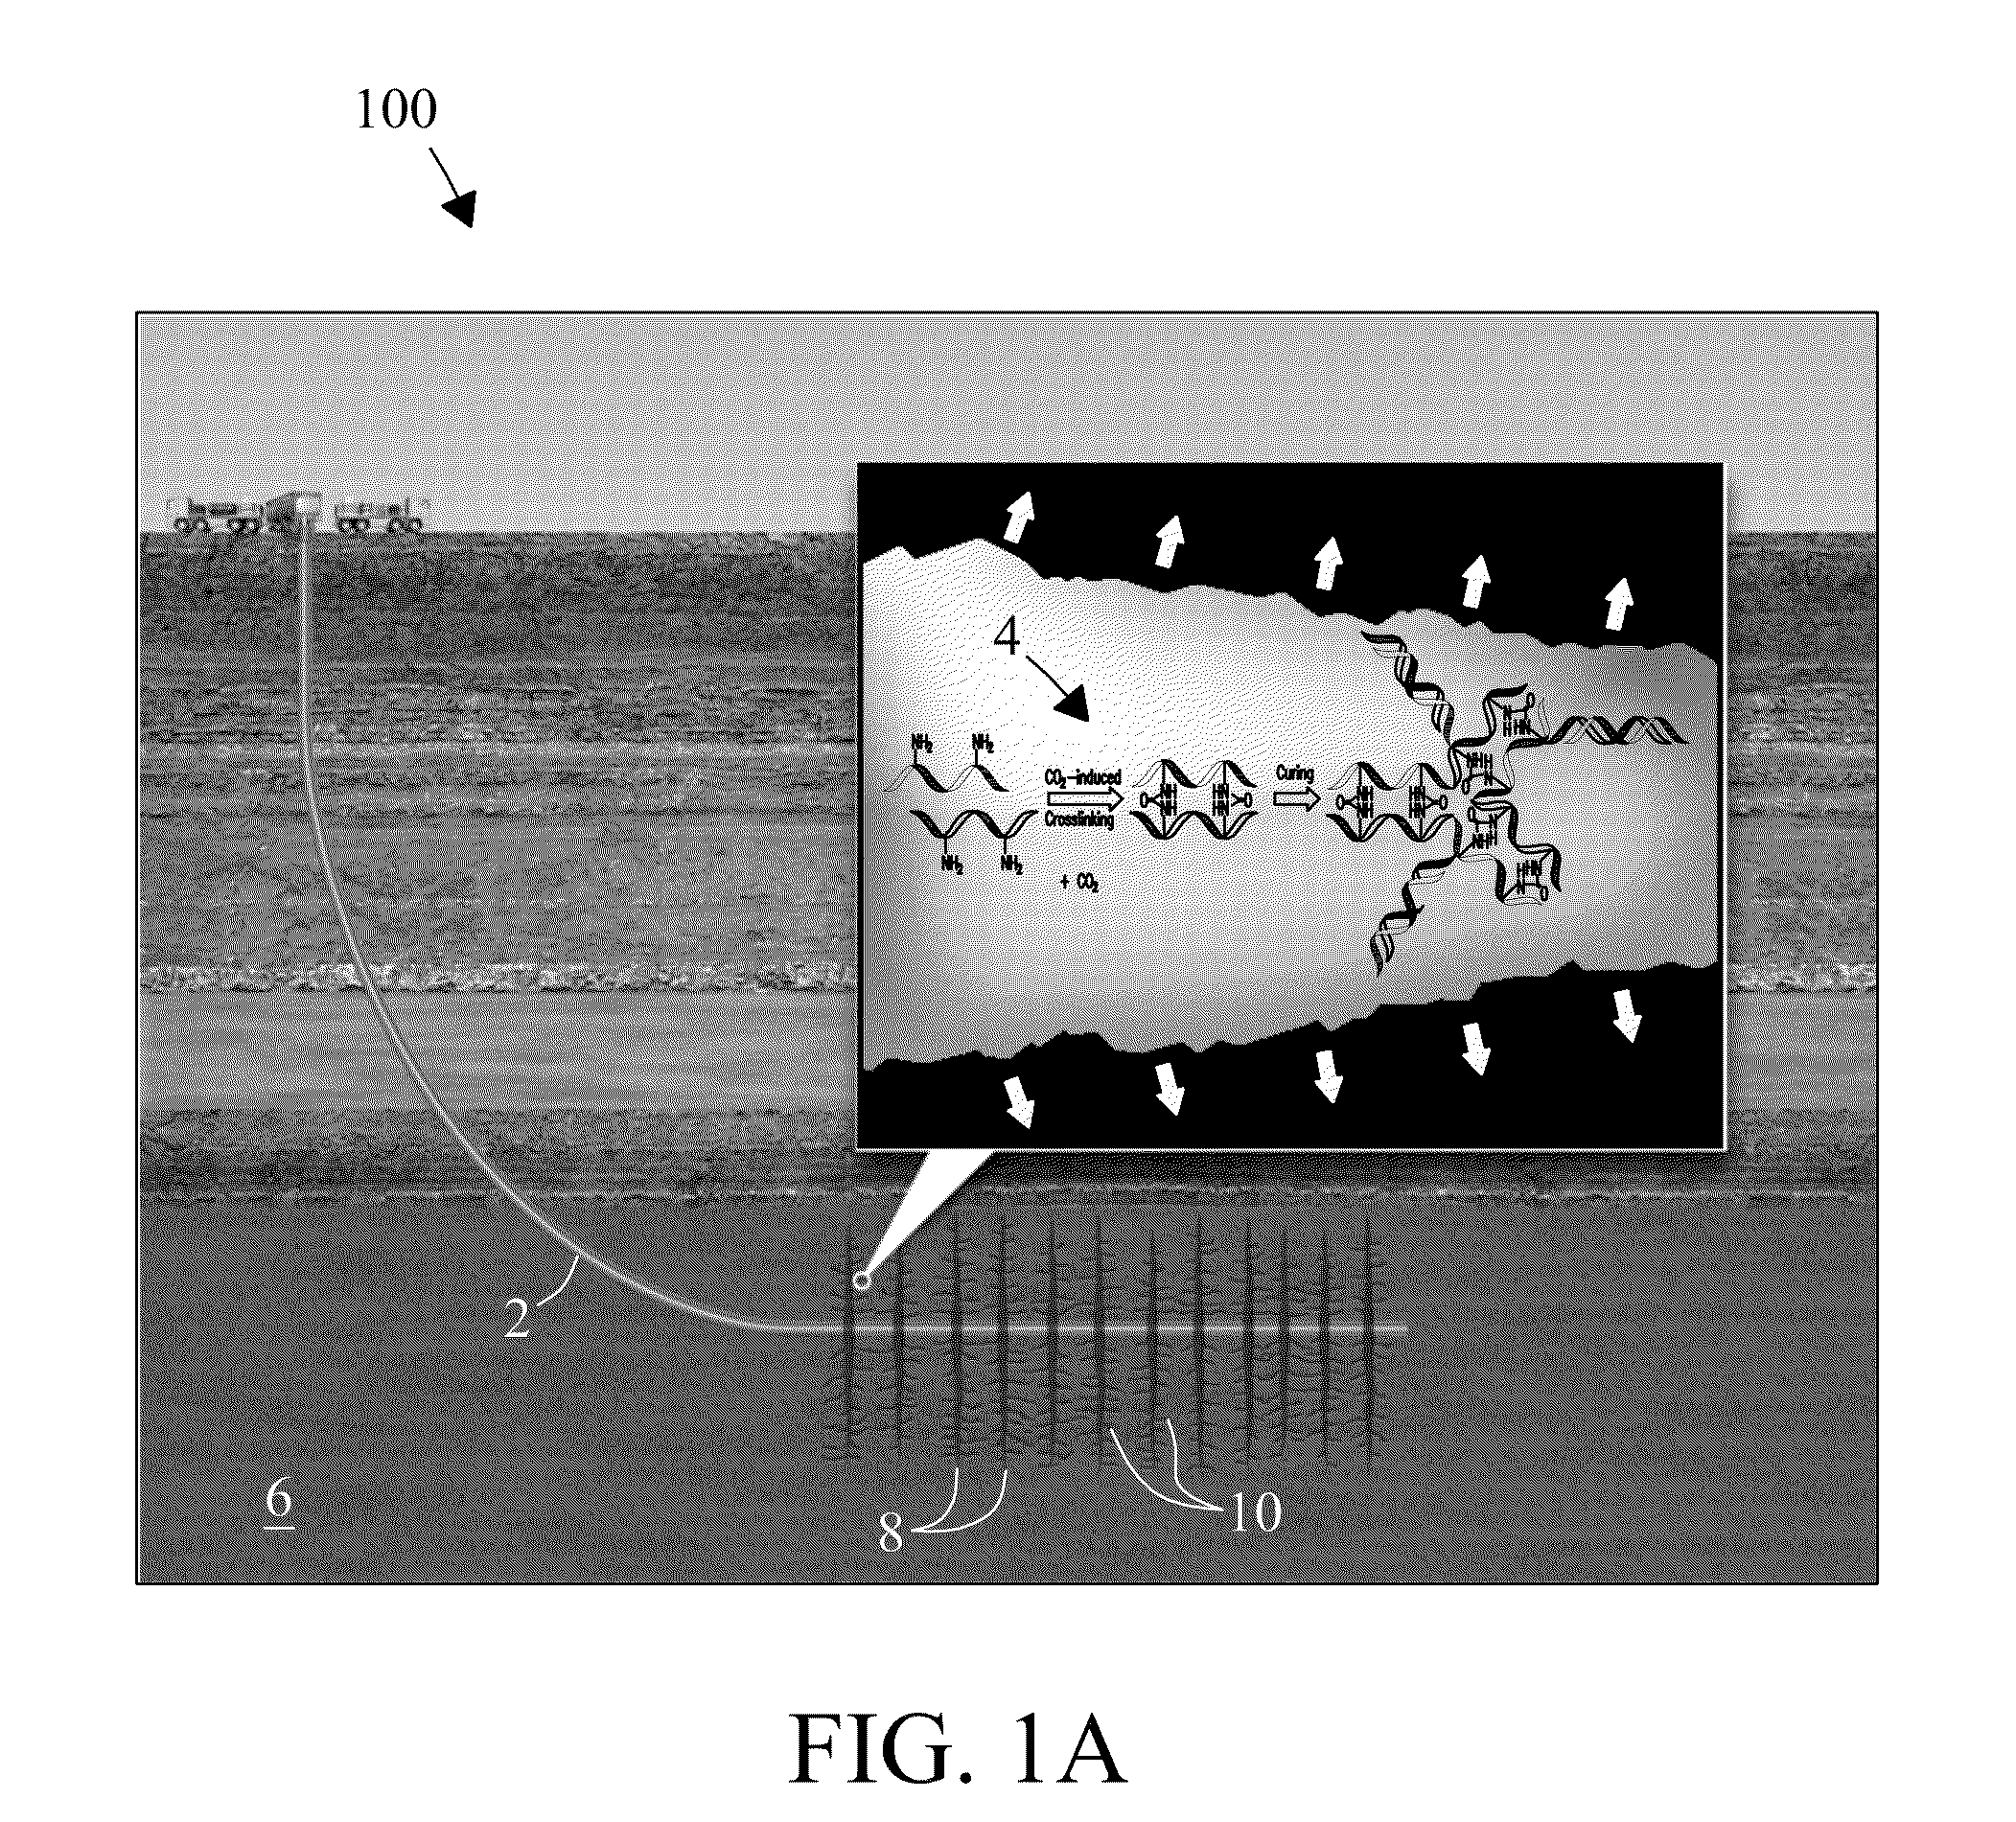 Electrophilic acid gas-reactive fluid, proppant, and process for enhanced fracturing and recovery of energy producing materials